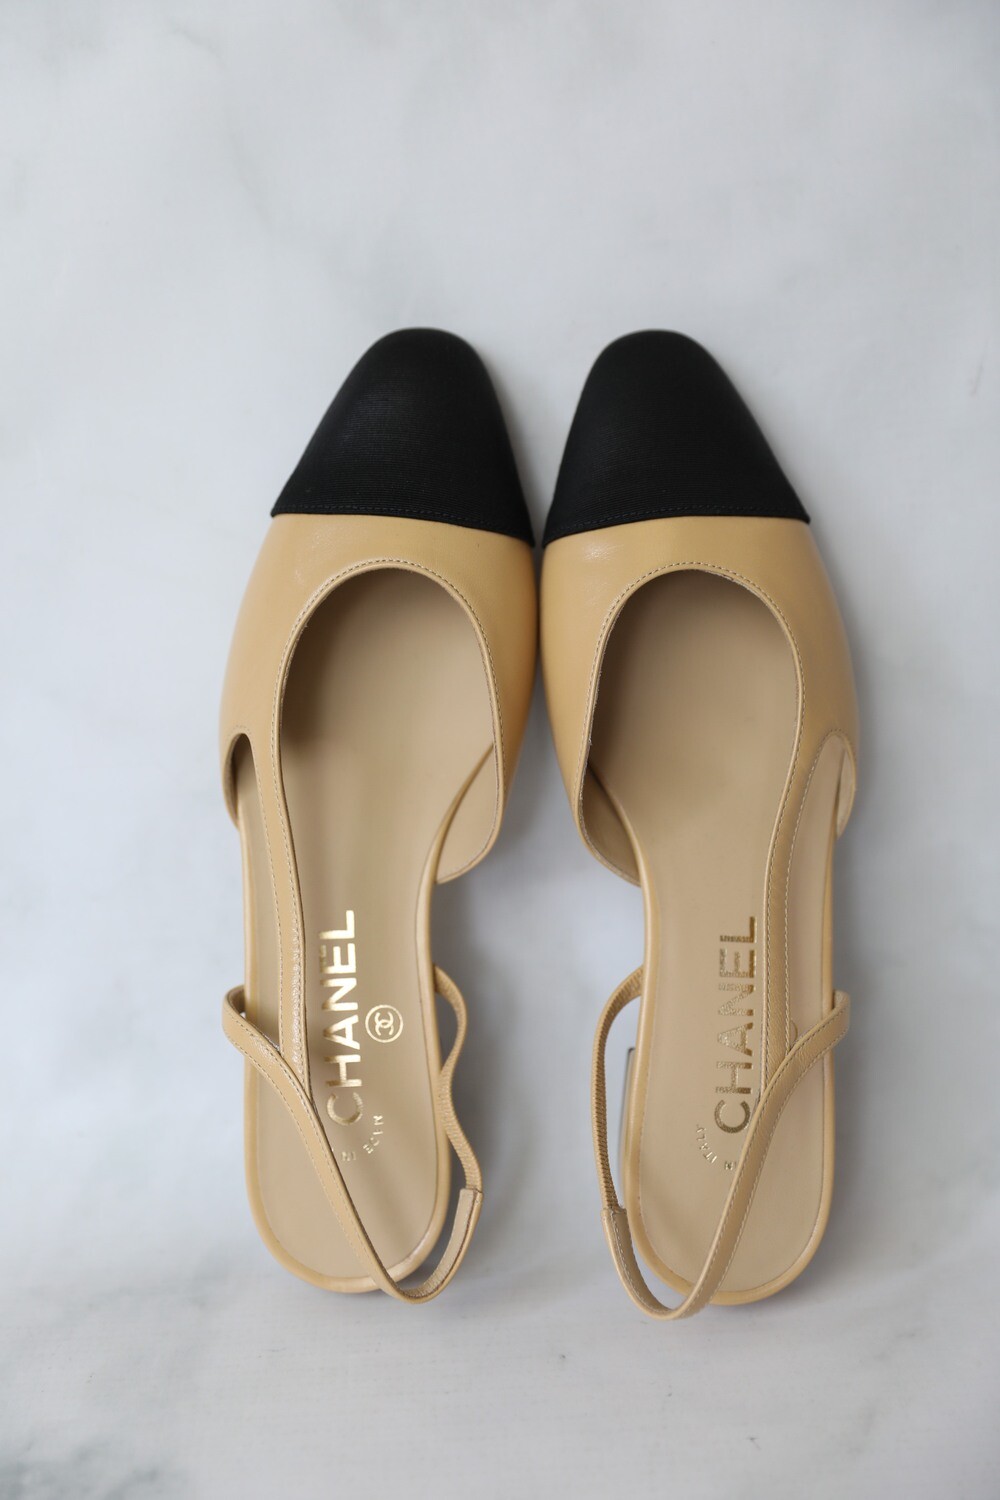 Chanel Shoes Slingback Flats, Beige and Black, Size 38.5, As New in Box  WA001